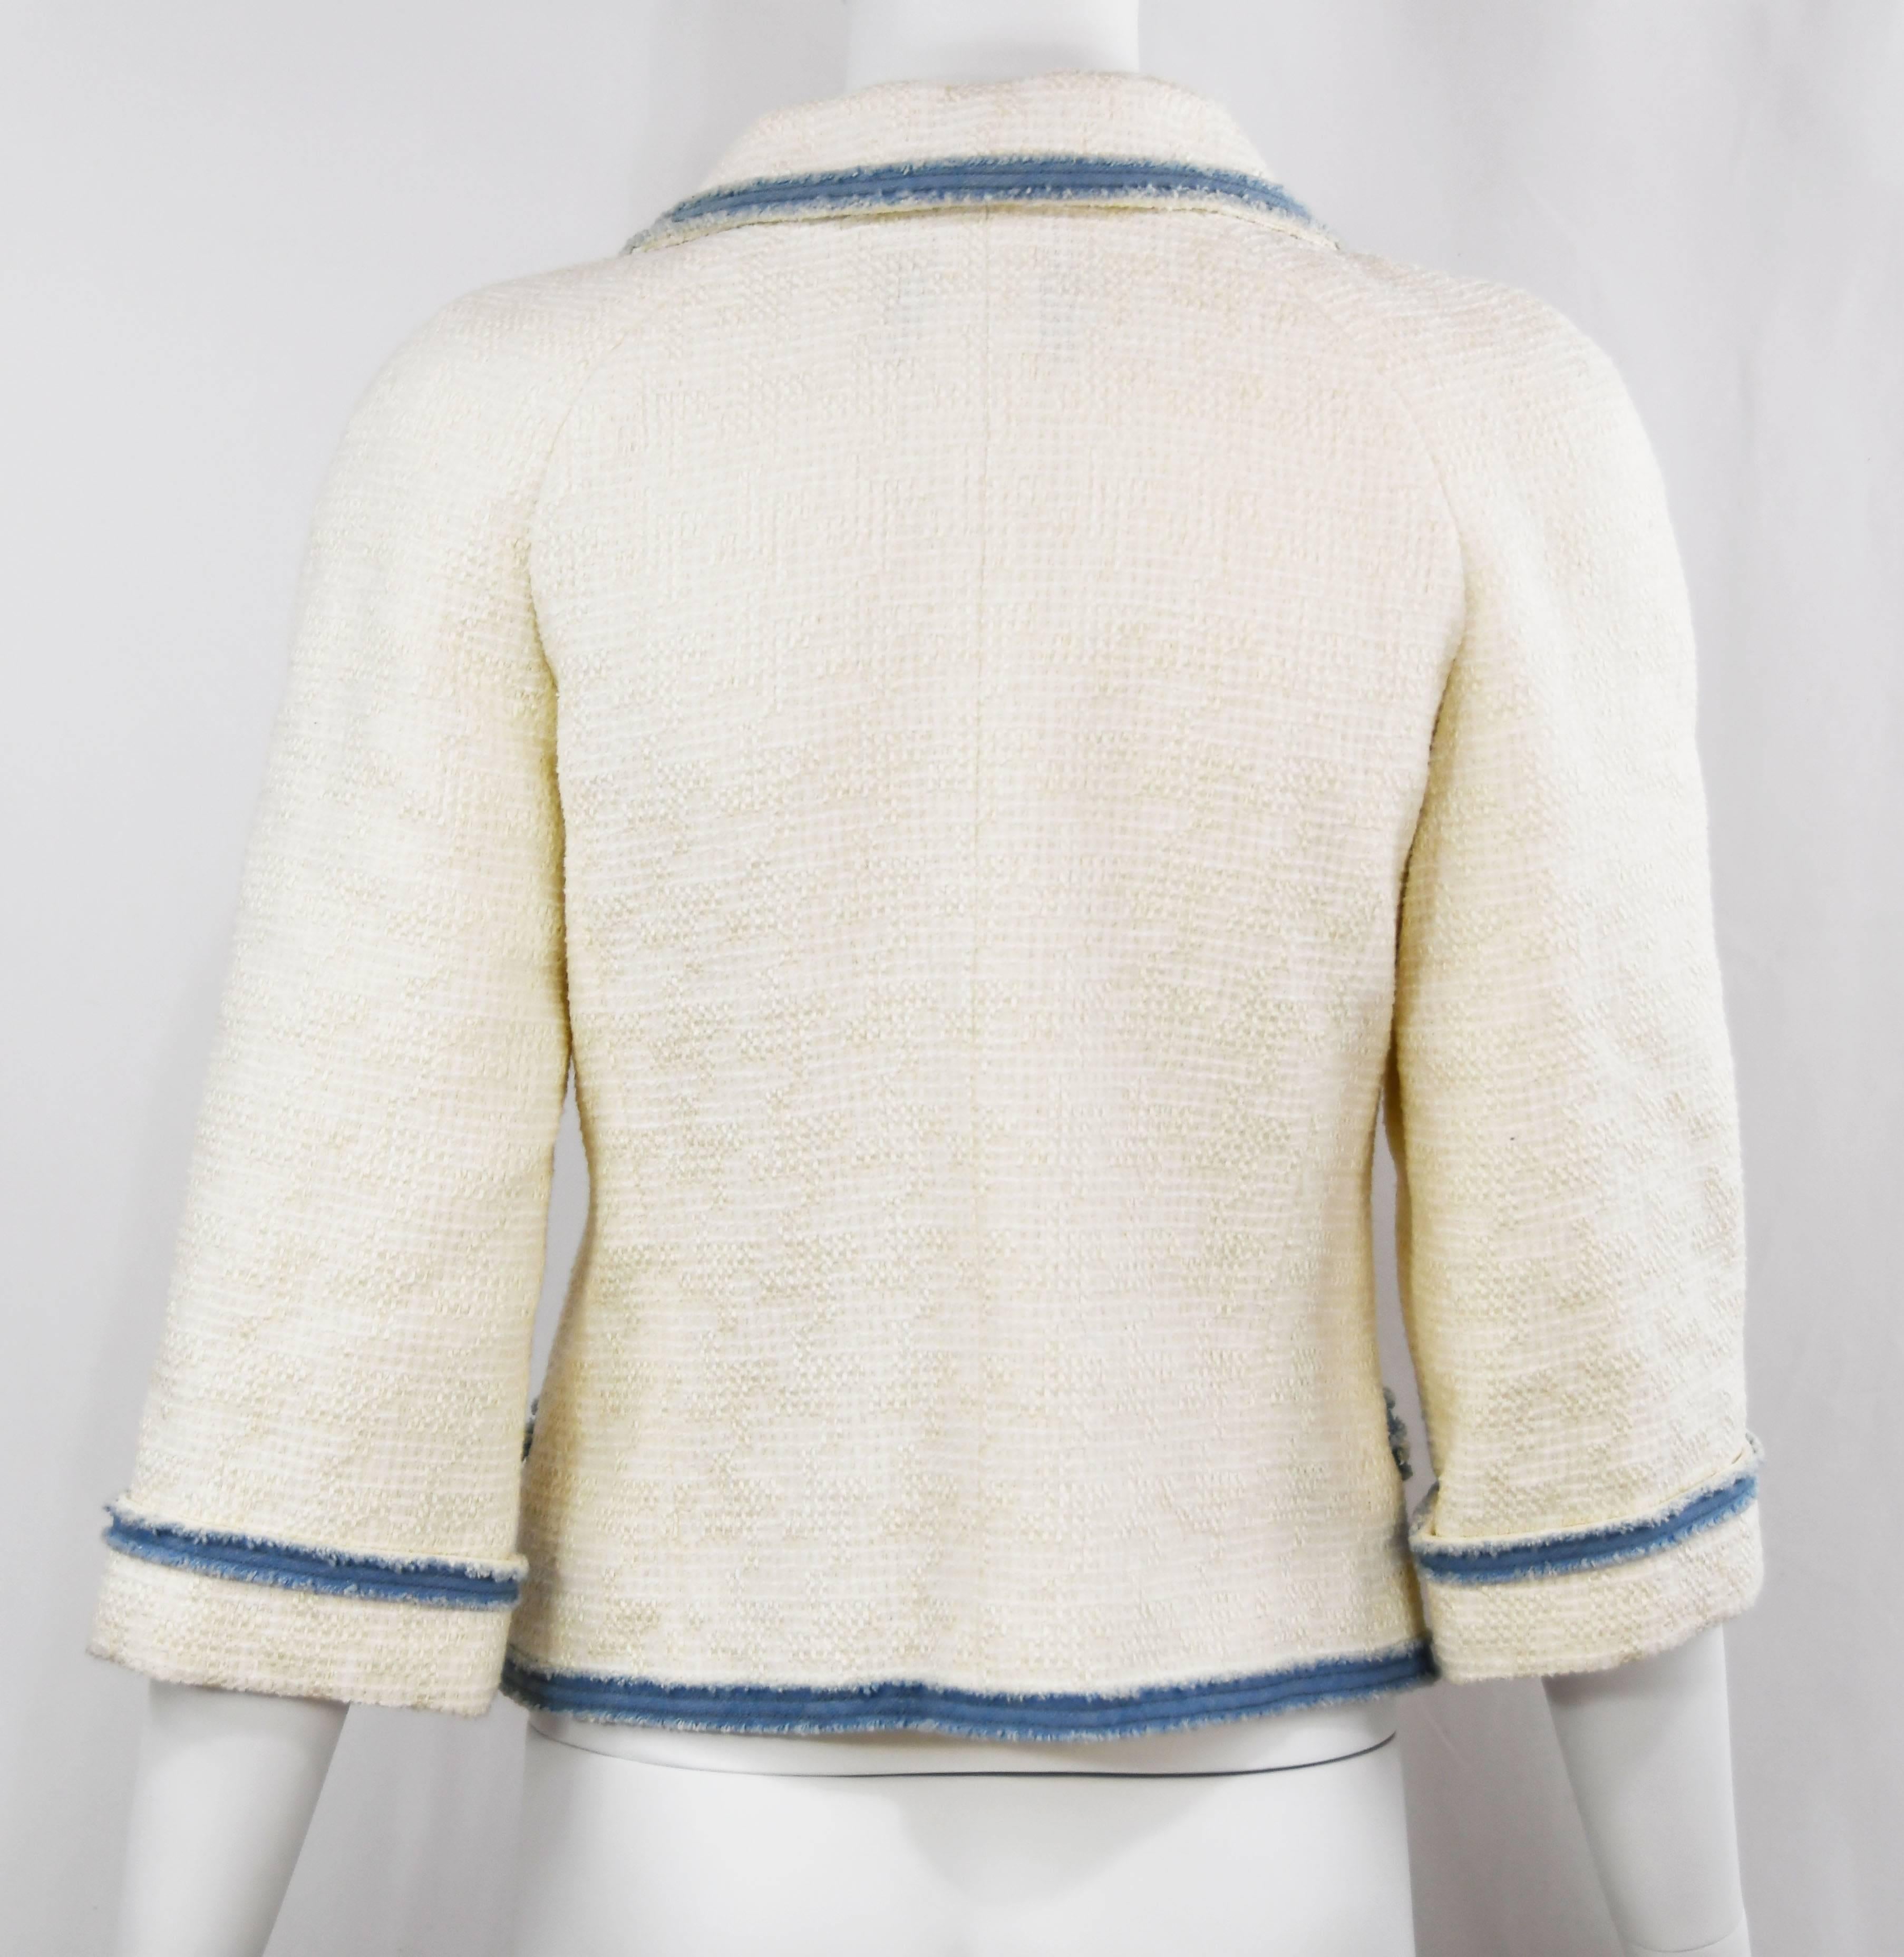 Chanel 2007 Timeless White Boucle Denim Trimmed Jacket with Logo ...